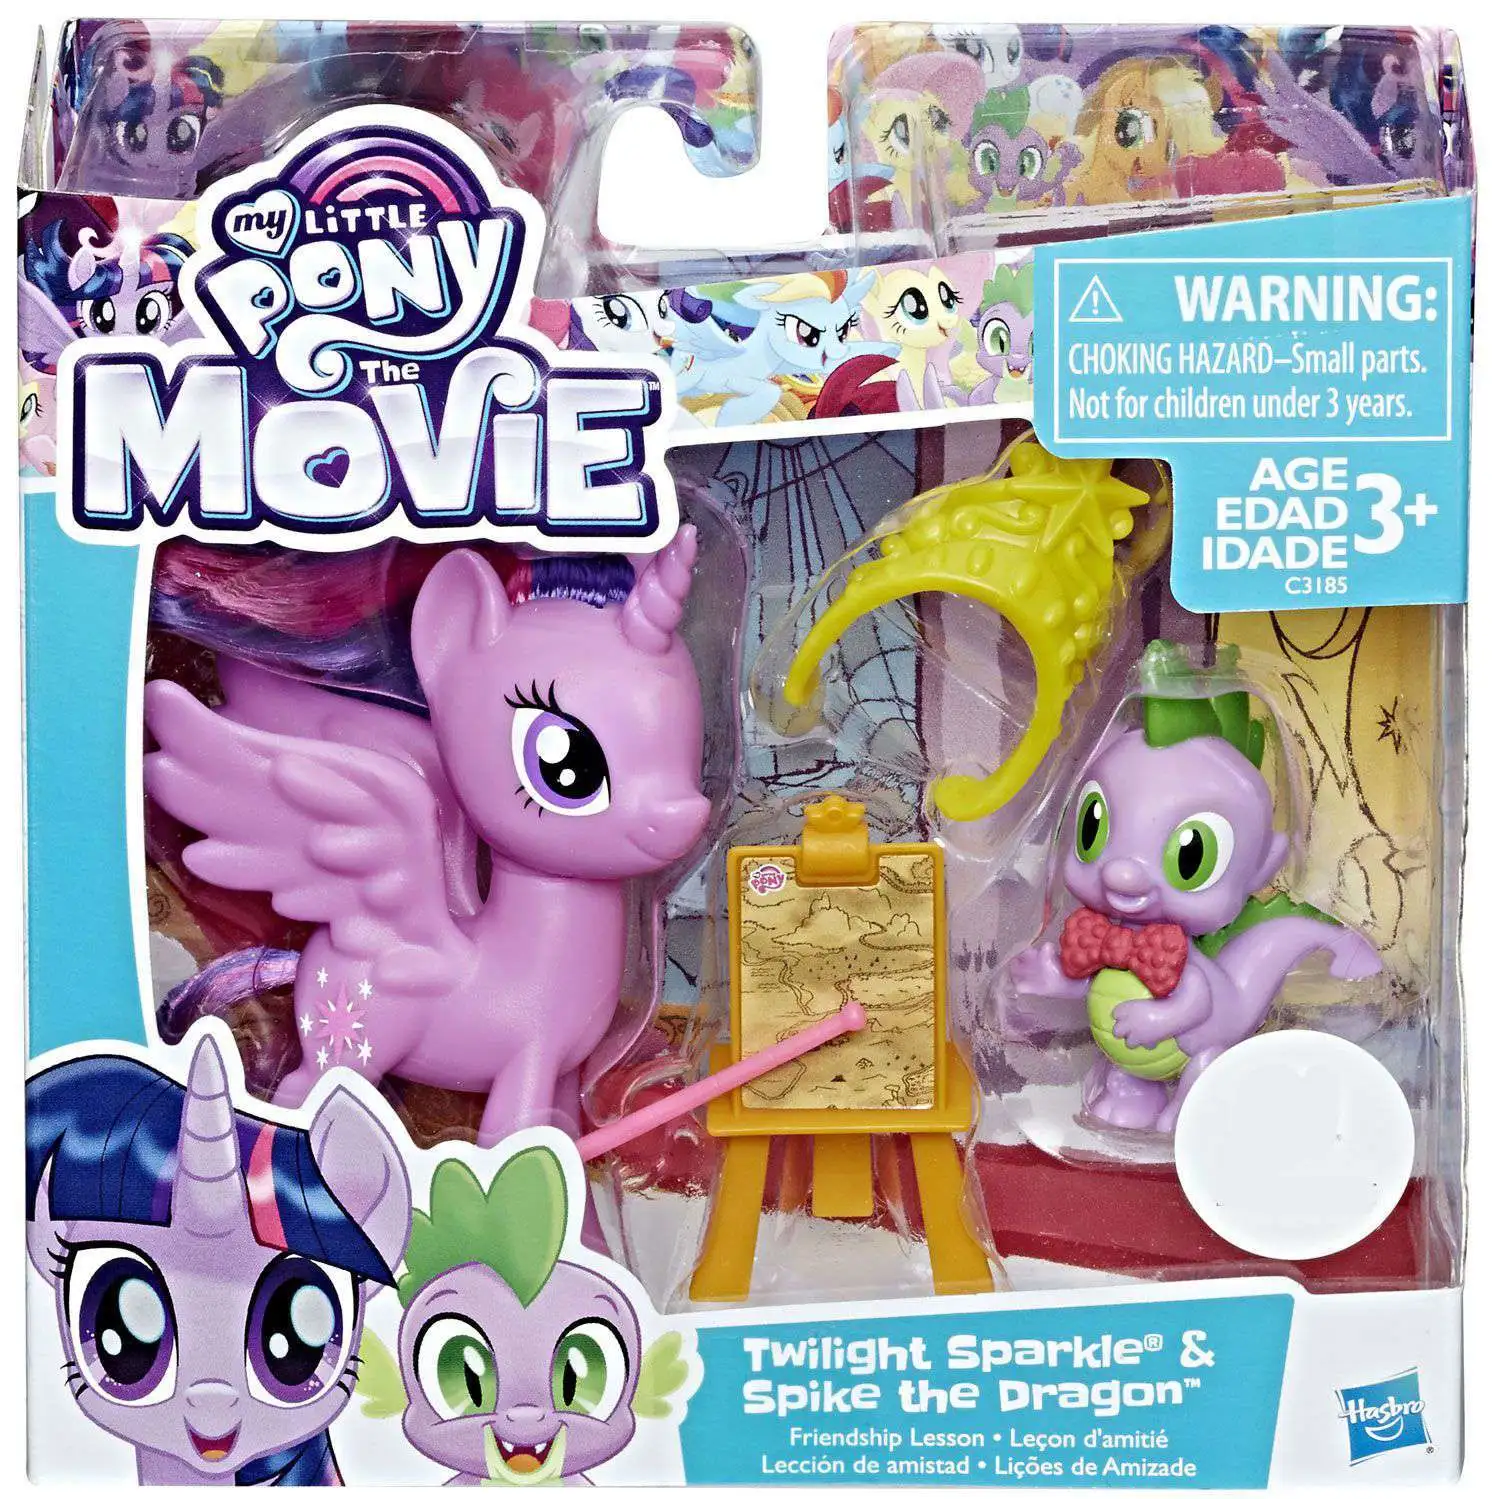 MY LITTLE PONY EASTER TOY GIFT BASKET TOYS SPIKE DRAGON PLUSH FIGURE PLAY  SET